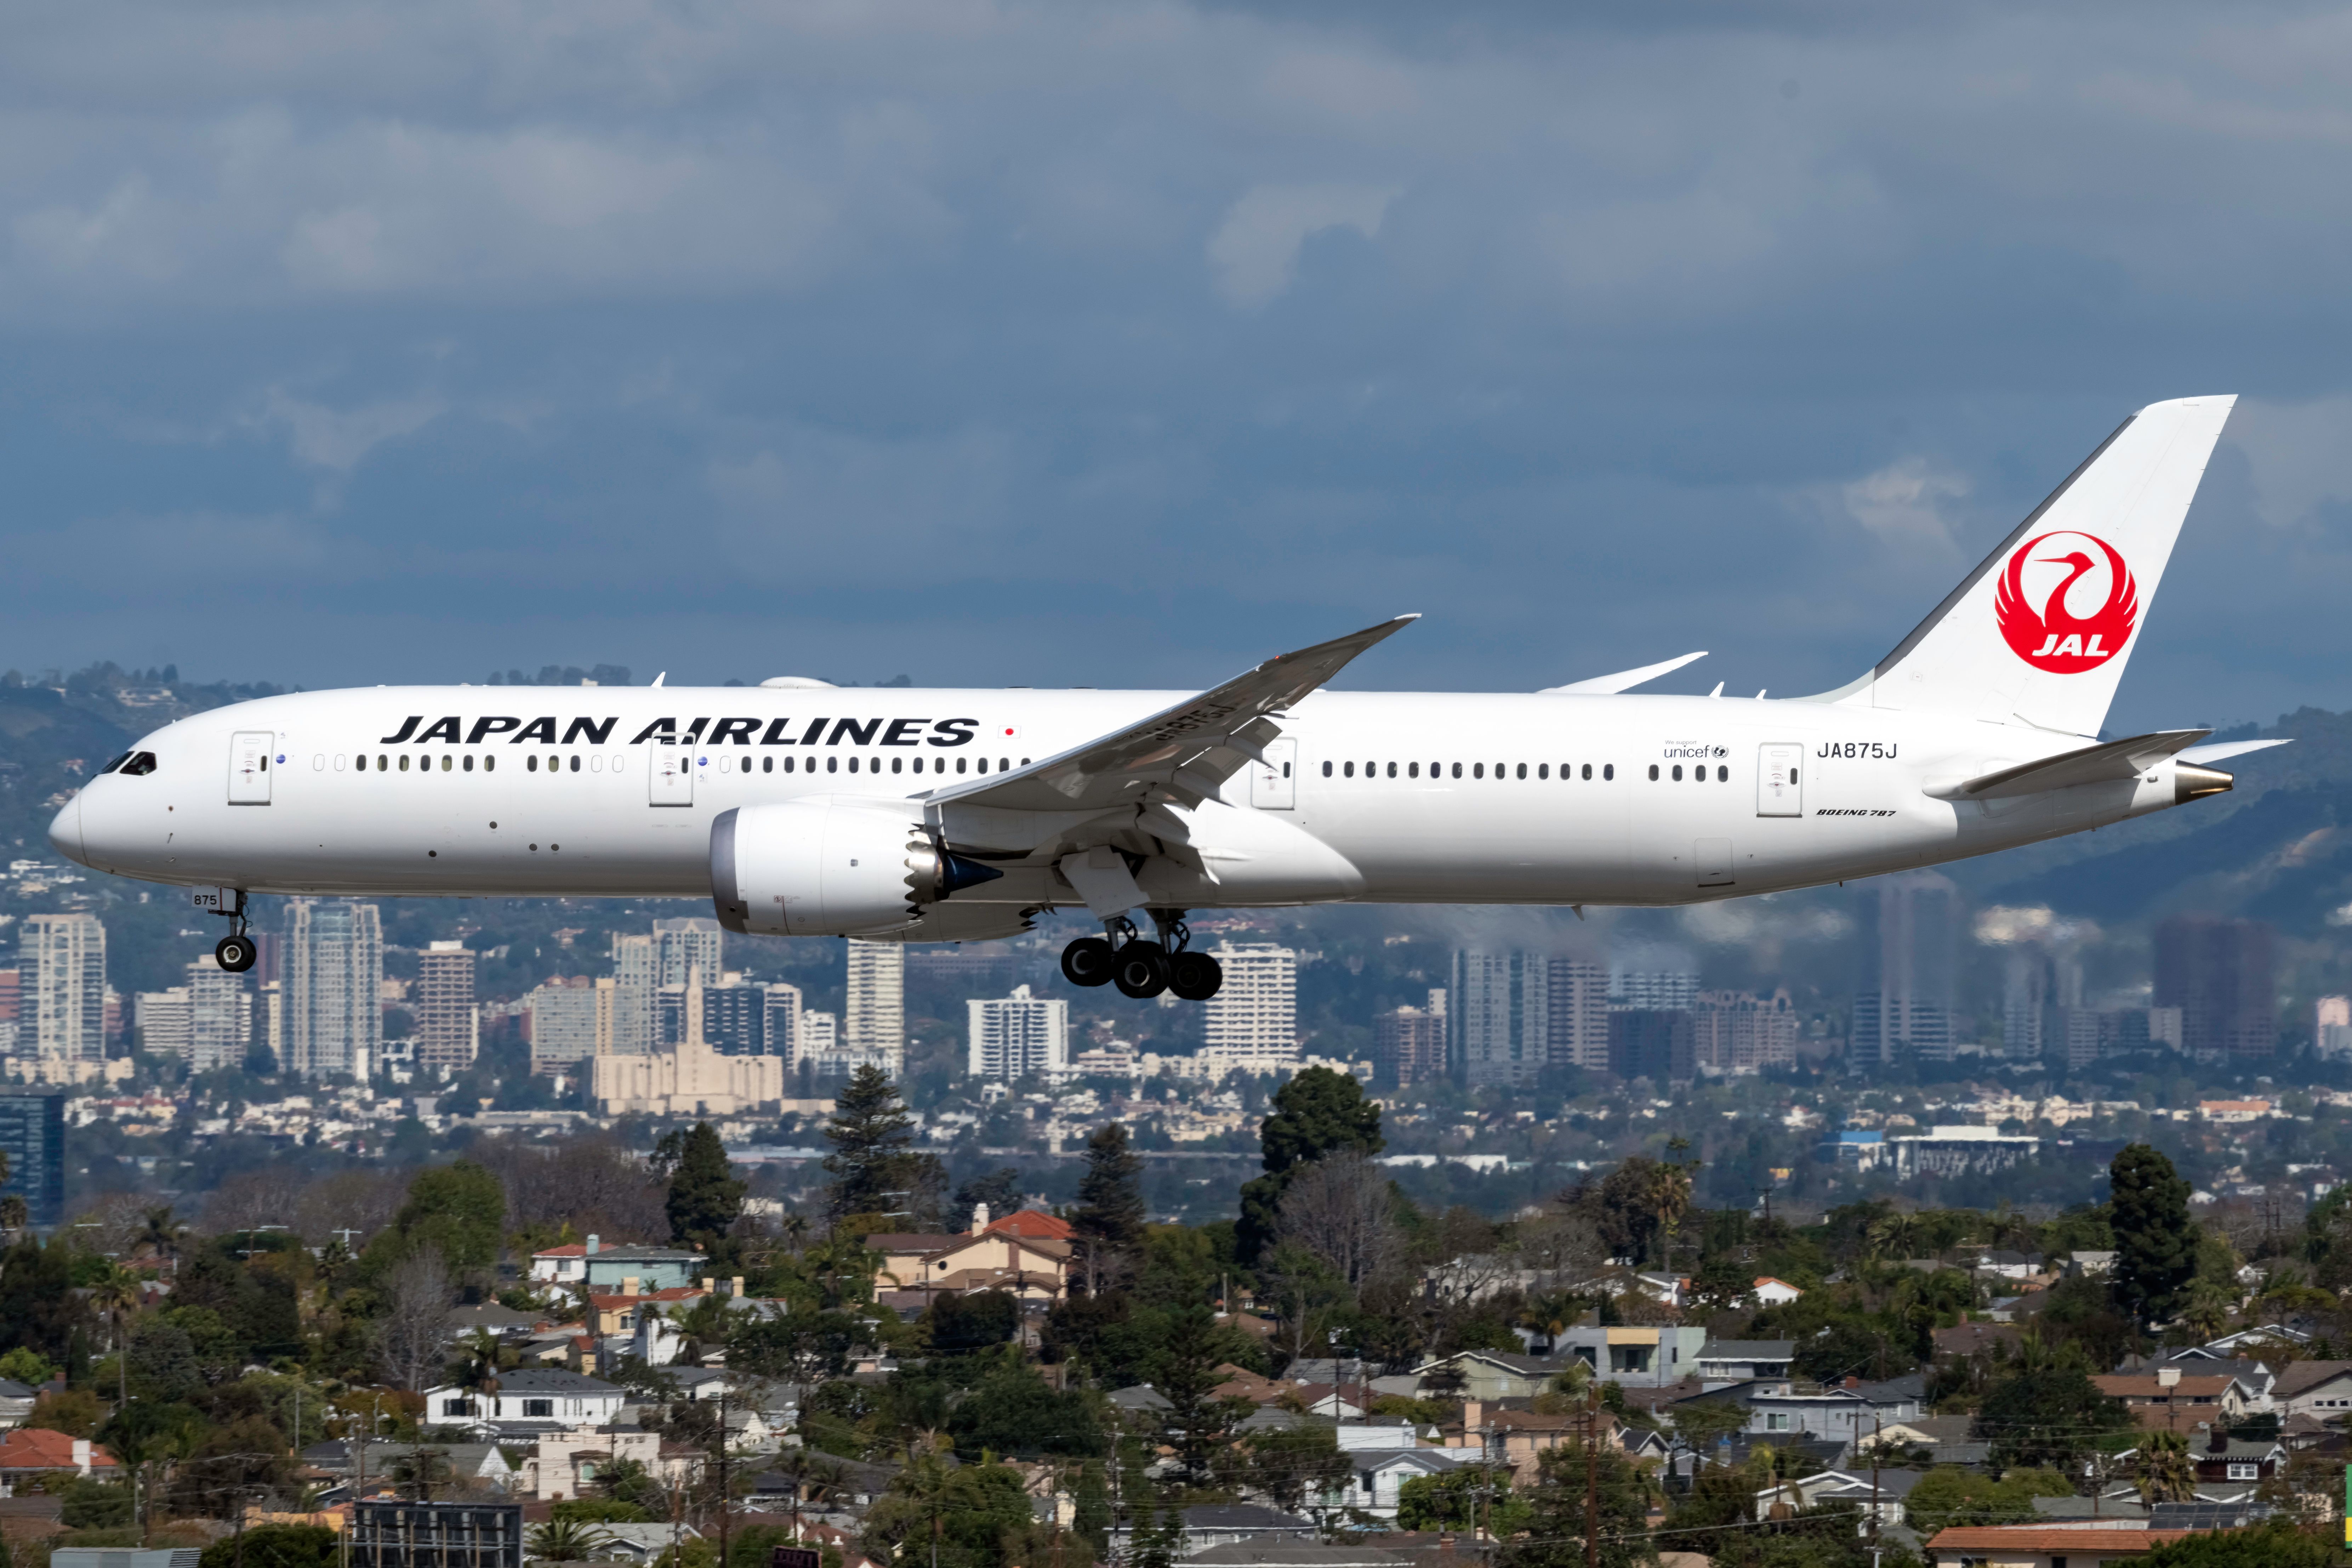 A Japan Airlines Boeing 787-9 Dreamliner about to land.